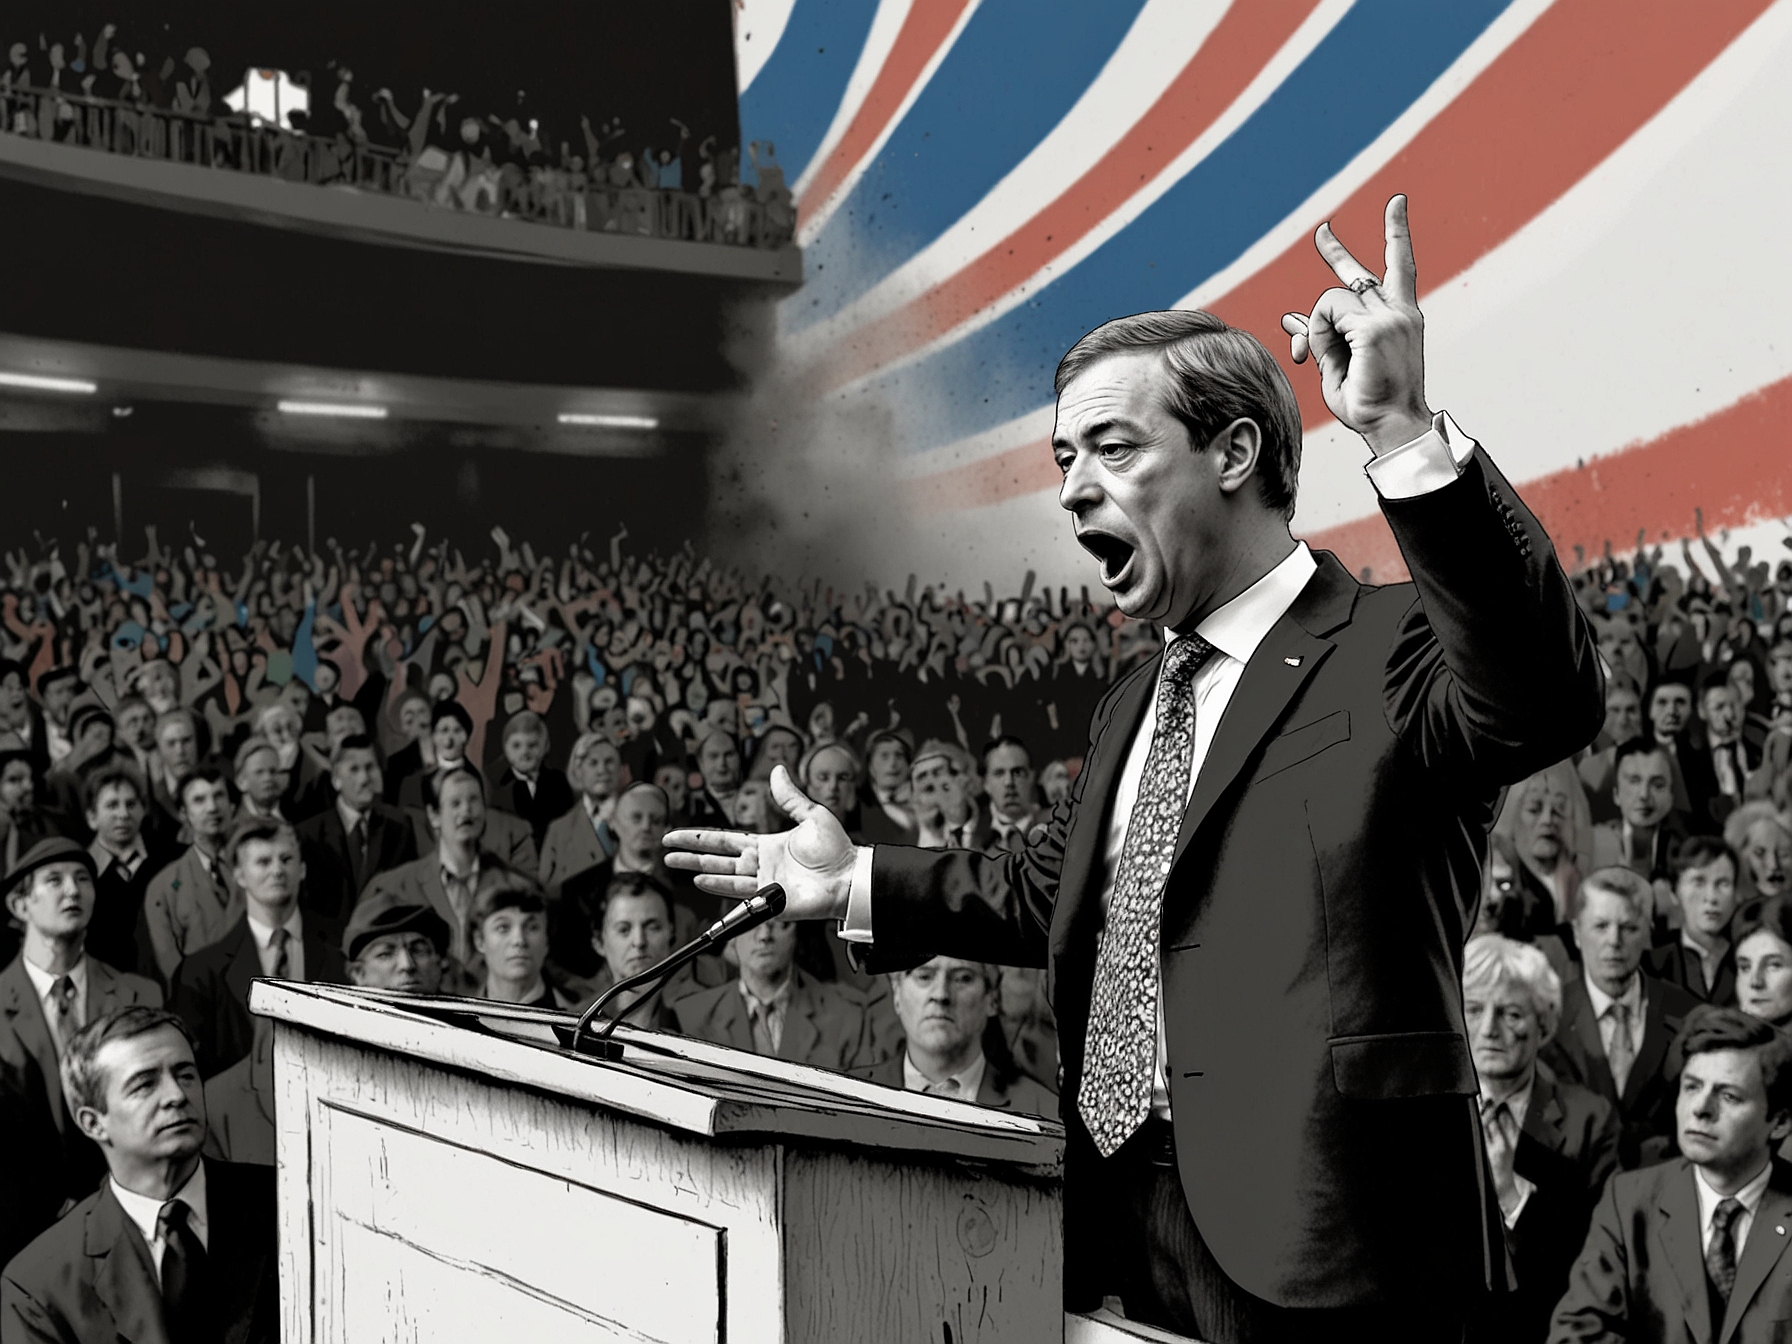 Nigel Farage addressing a rally, symbolizing his party's aggressive campaign efforts and strategic moves in pivotal constituencies as the election approaches.